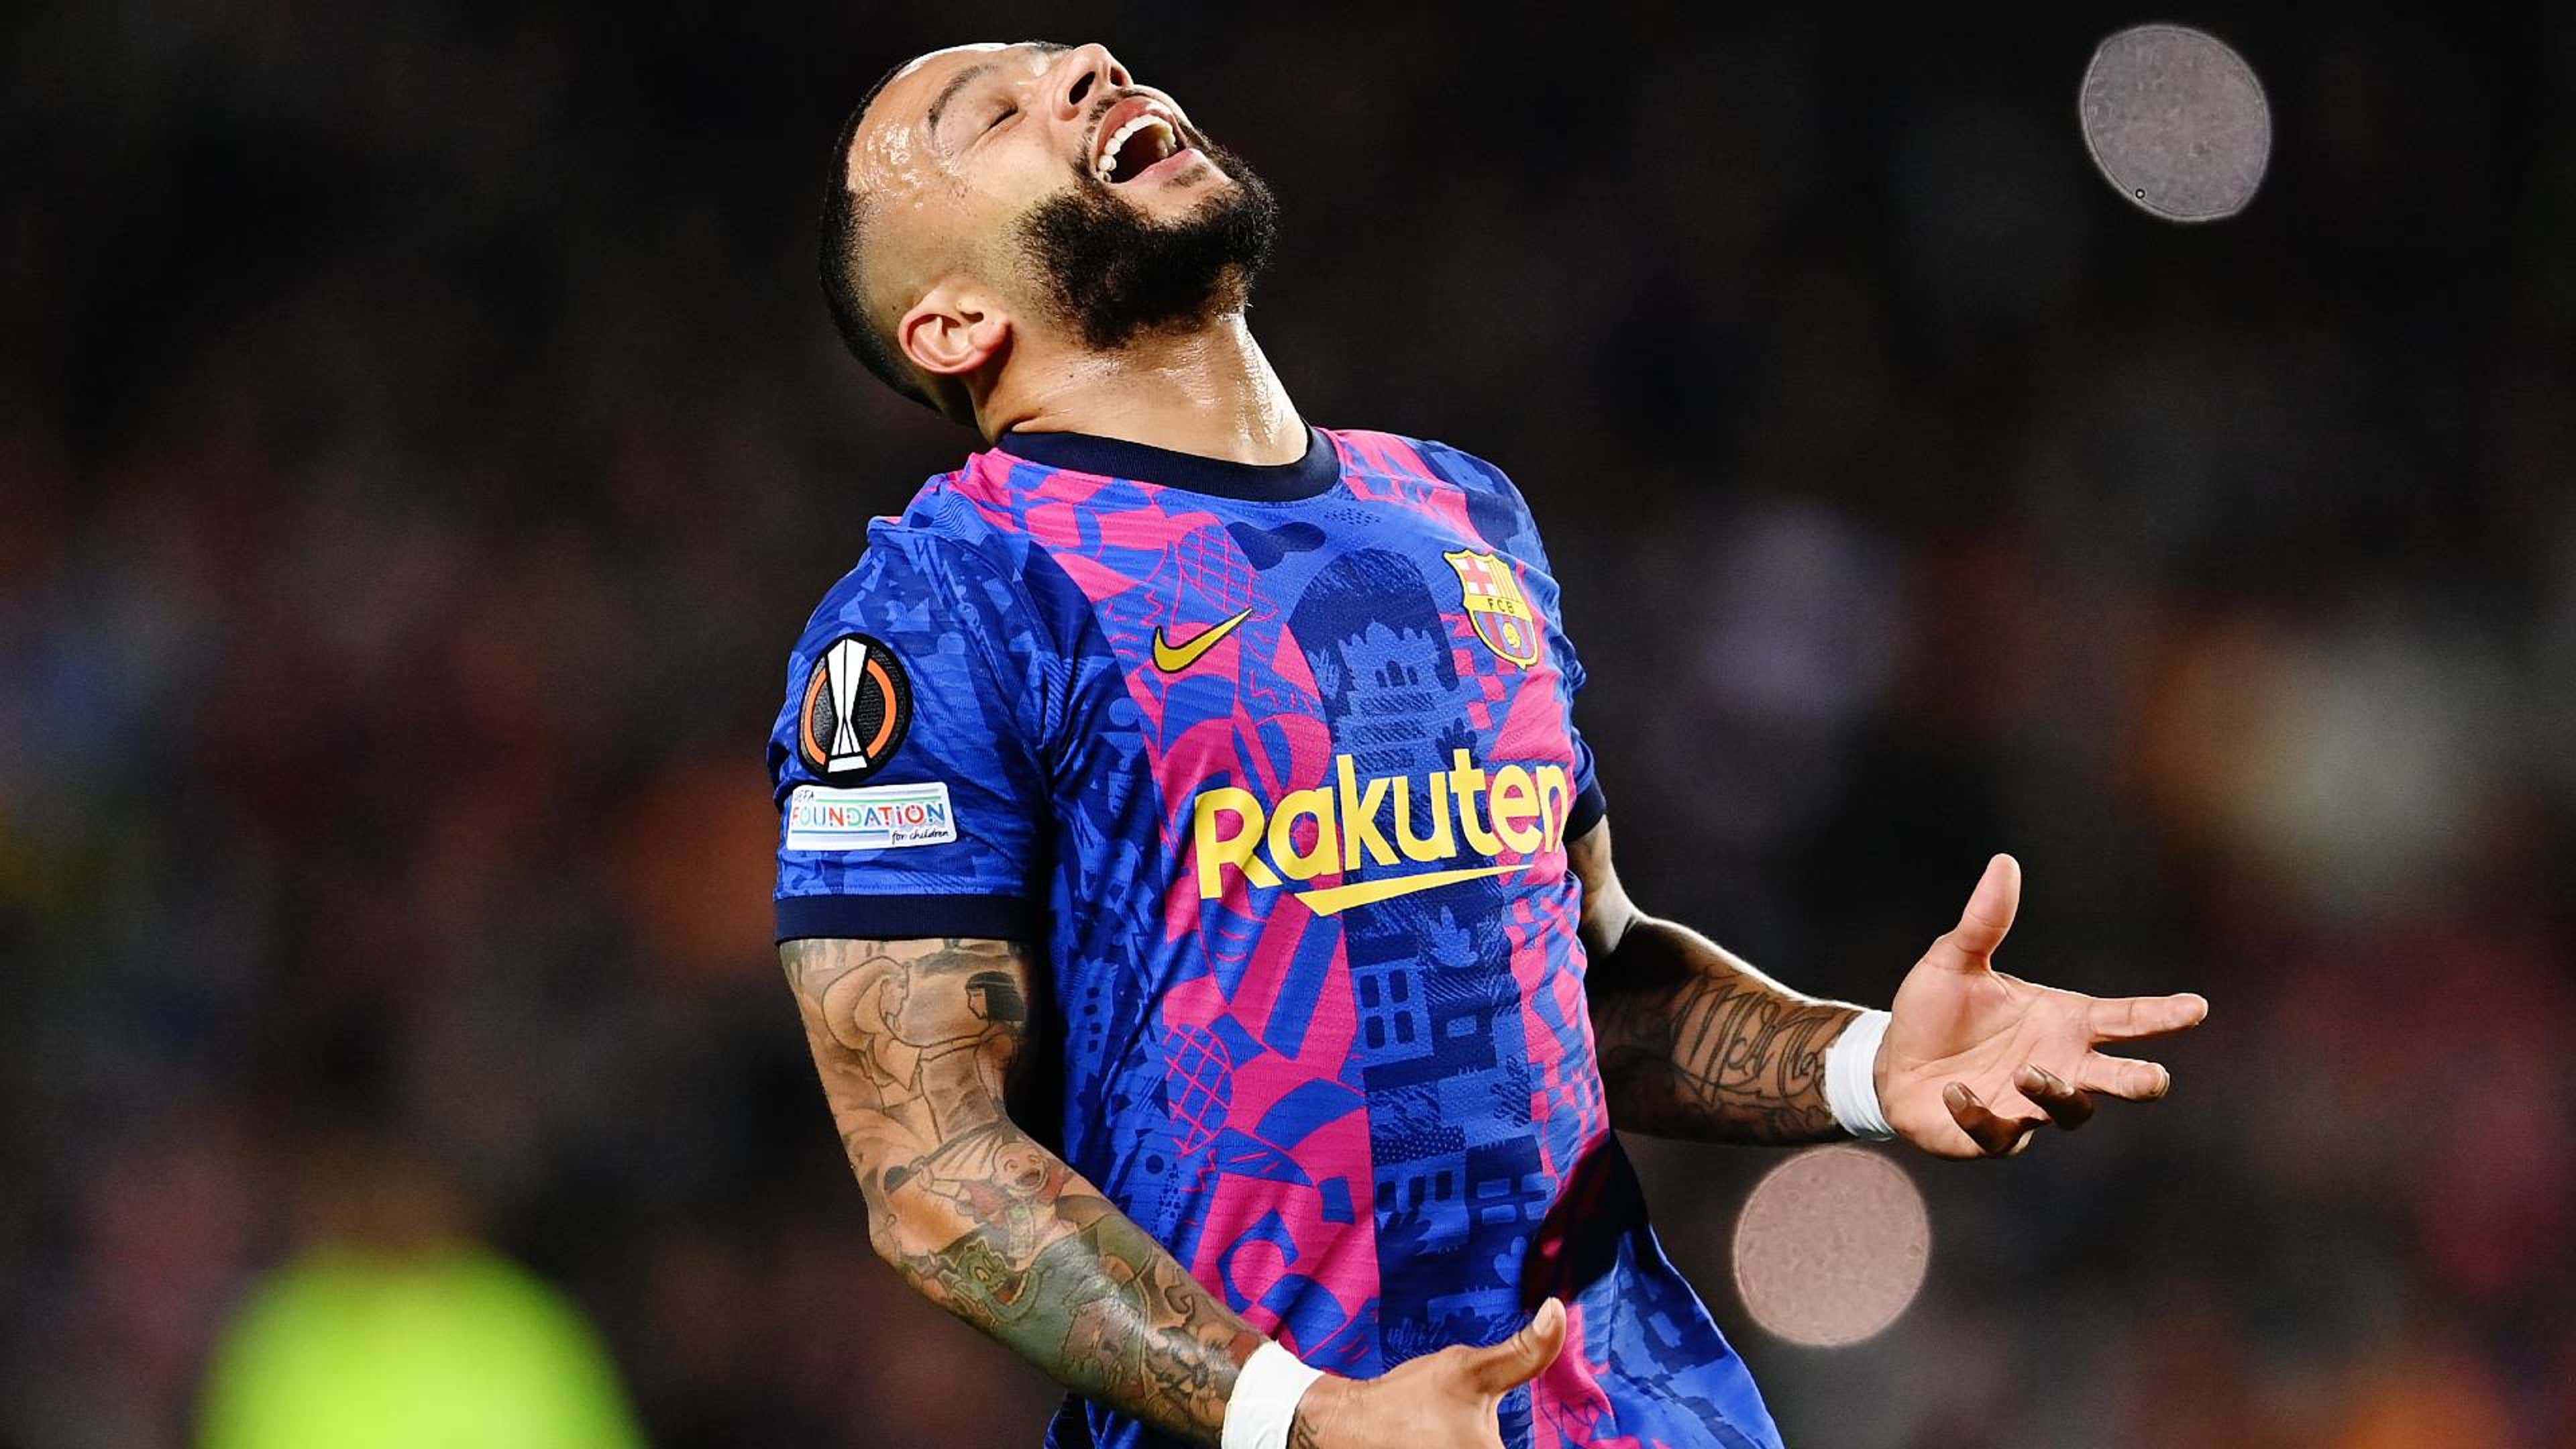 WATCH: Netherlands take an early lead through Barcelona's Memphis